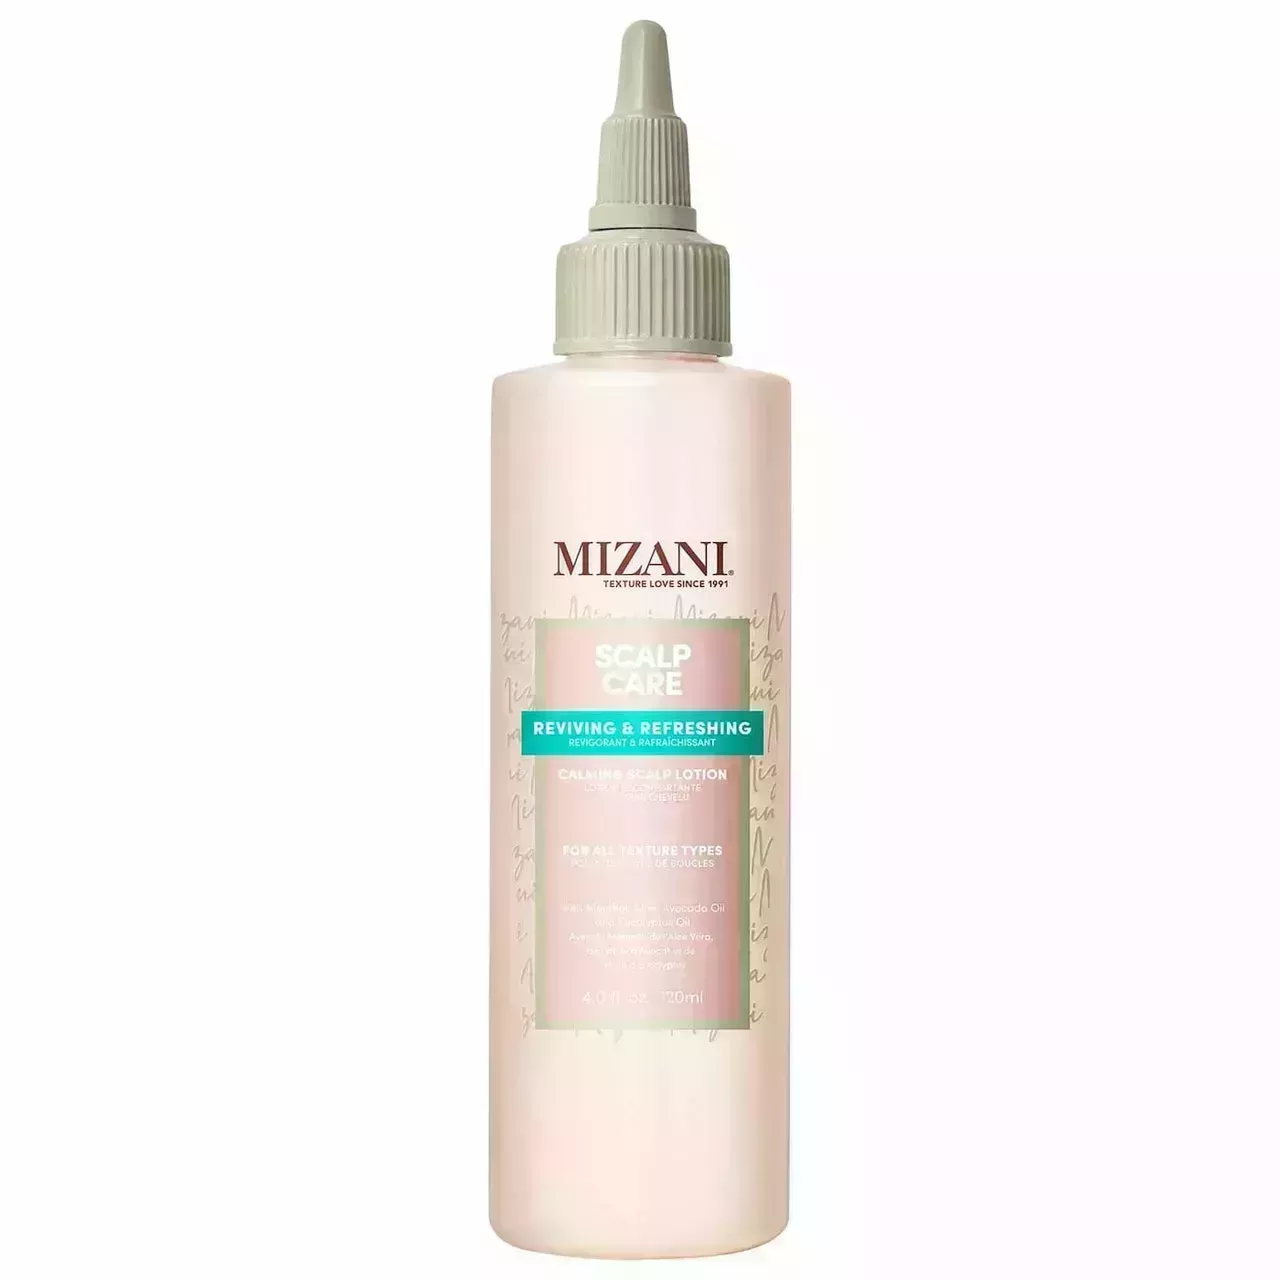 Mizani Scalp Care Soothing Scalp Lotion beige bottle with green pointed tip on white background